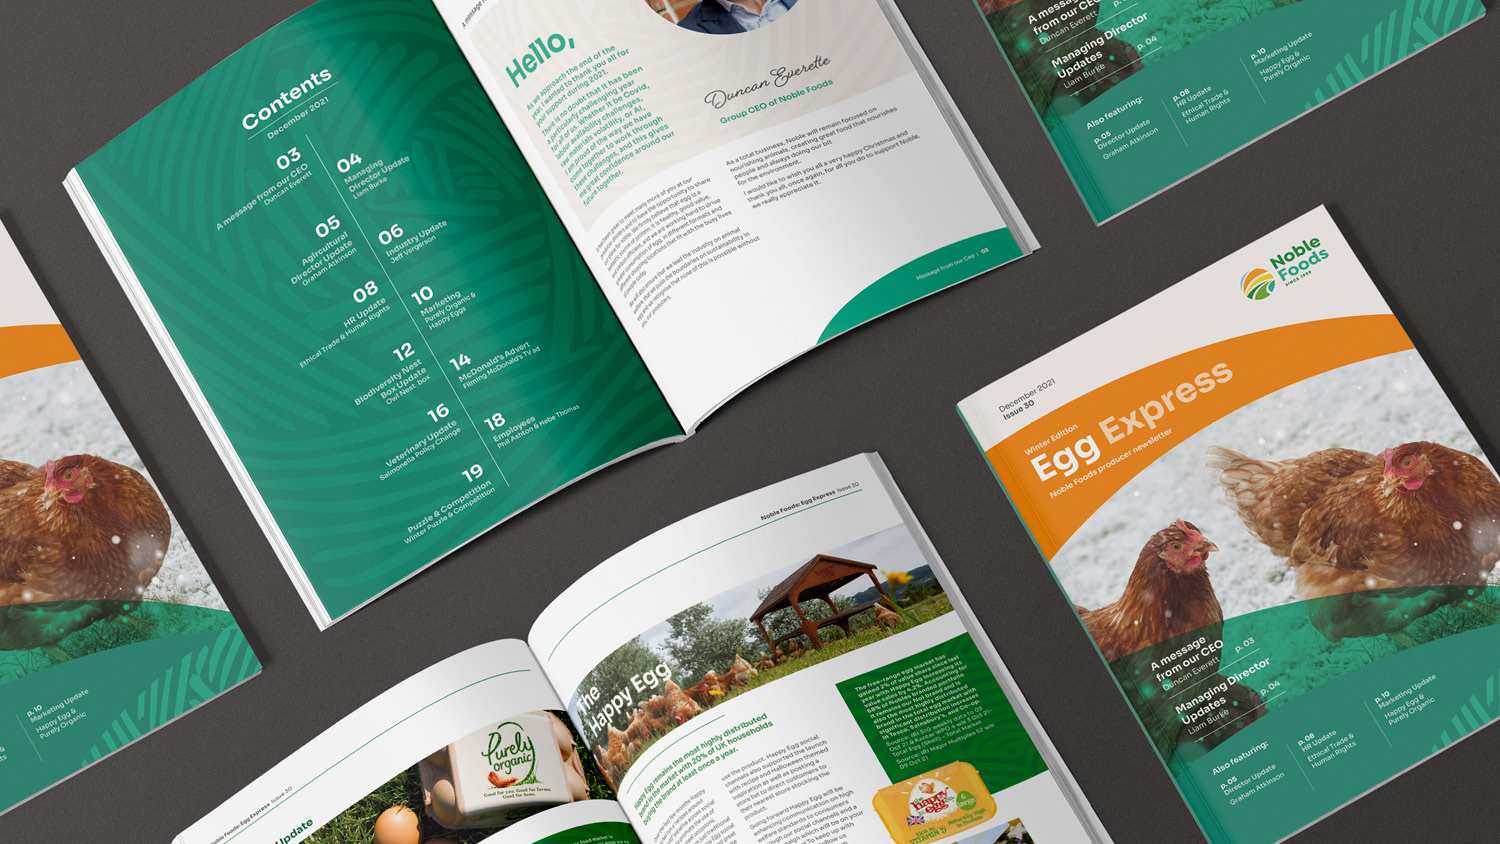 Noble foods booklets